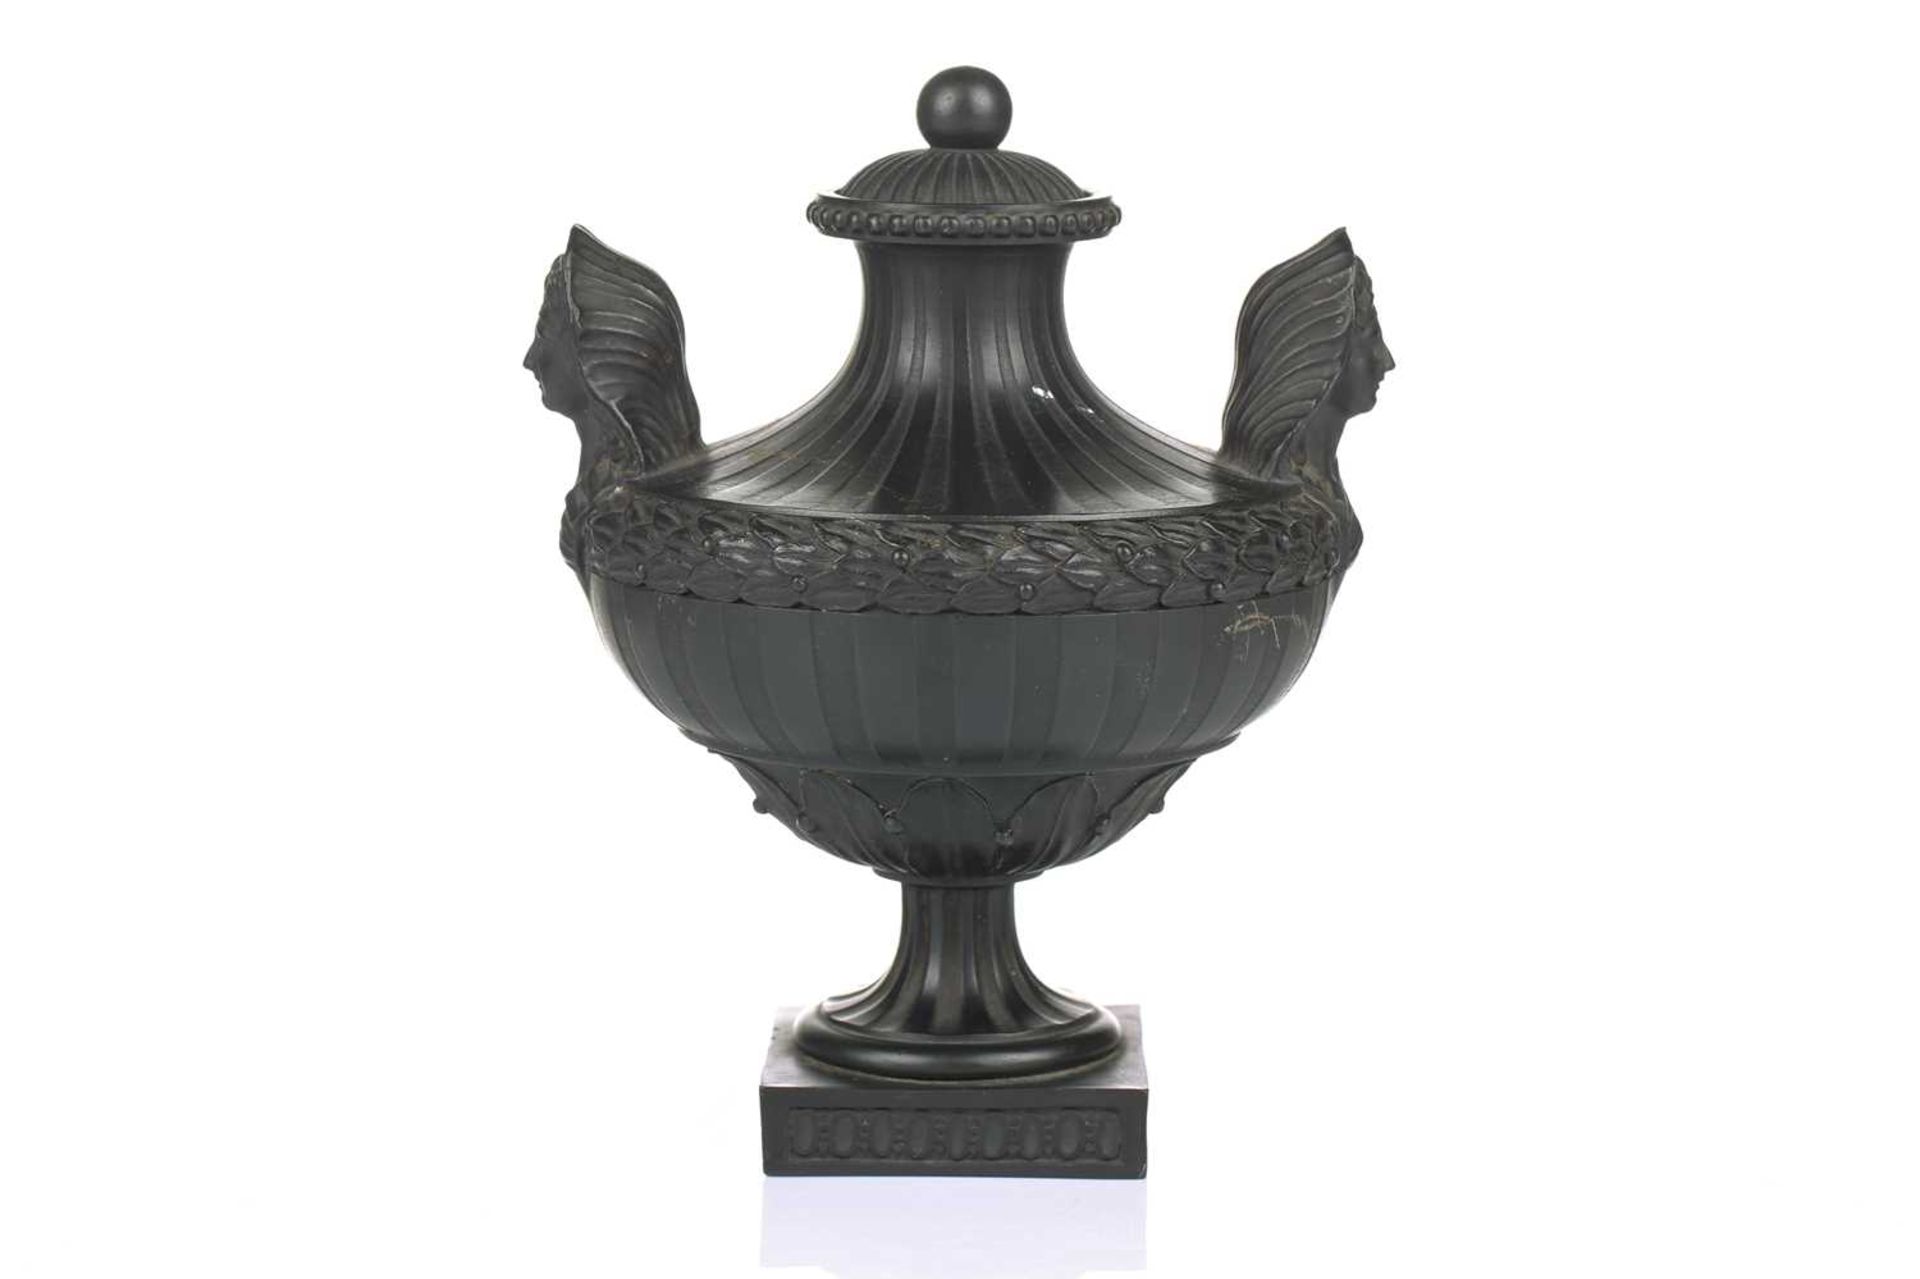 Wedgwood & Bentley, Etruria: a late 18th century black basalt urn and cover, of Classical form